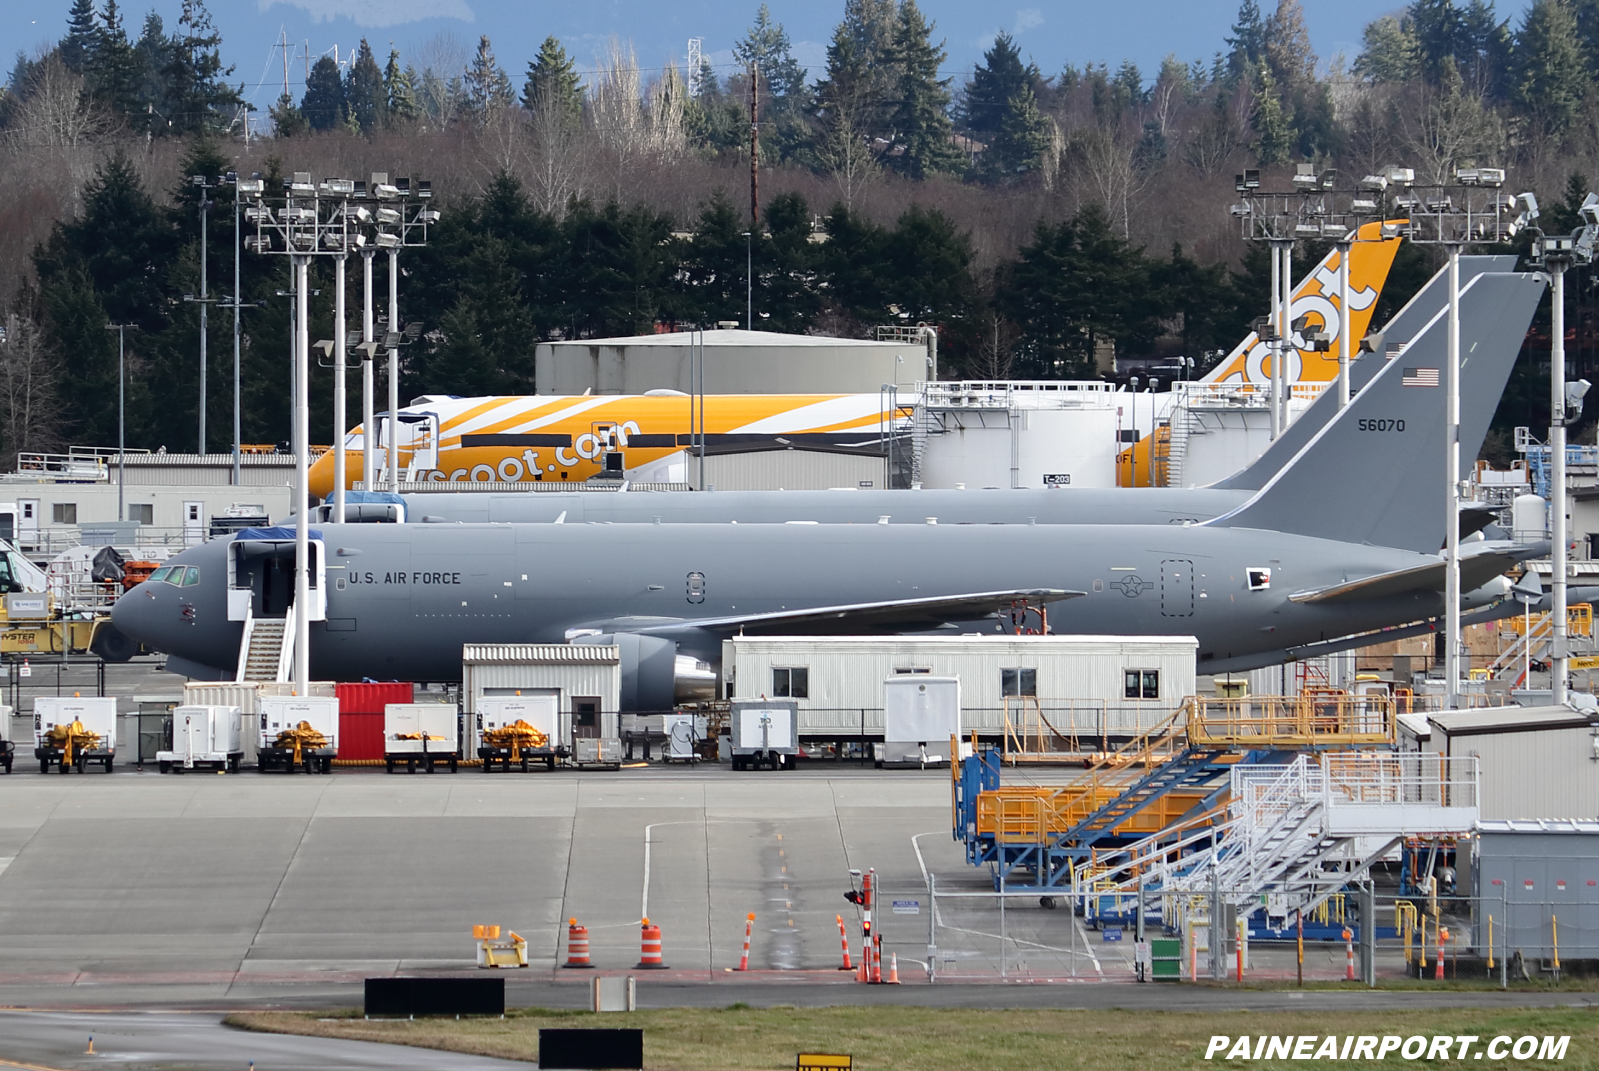 KC-46A 15-46070 at KPAE Paine Field